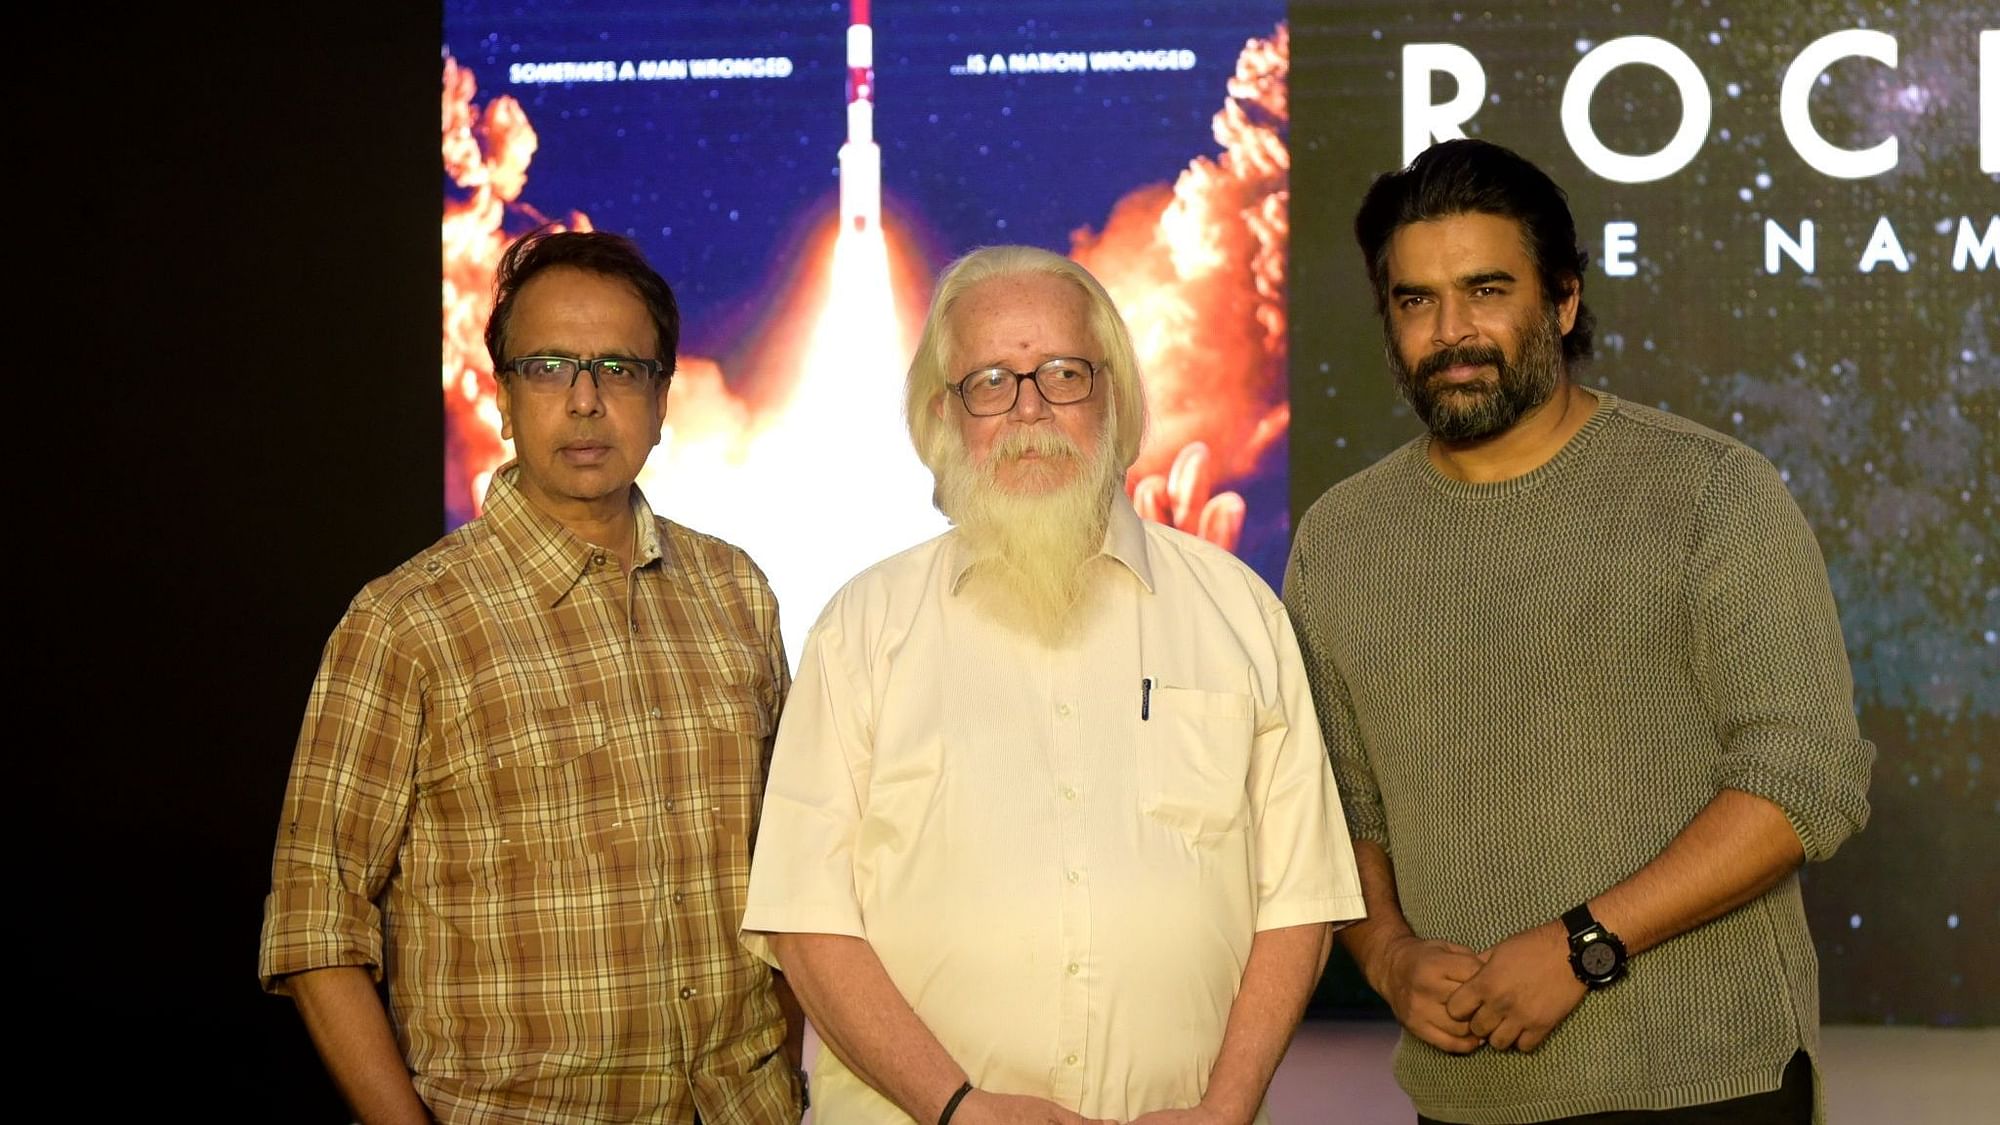 Here’s all you need to know about S Nambi Narayanan (centre), the man R Madhavan (right) plays in ‘Rocketry: The Nambi Effect’.&nbsp;